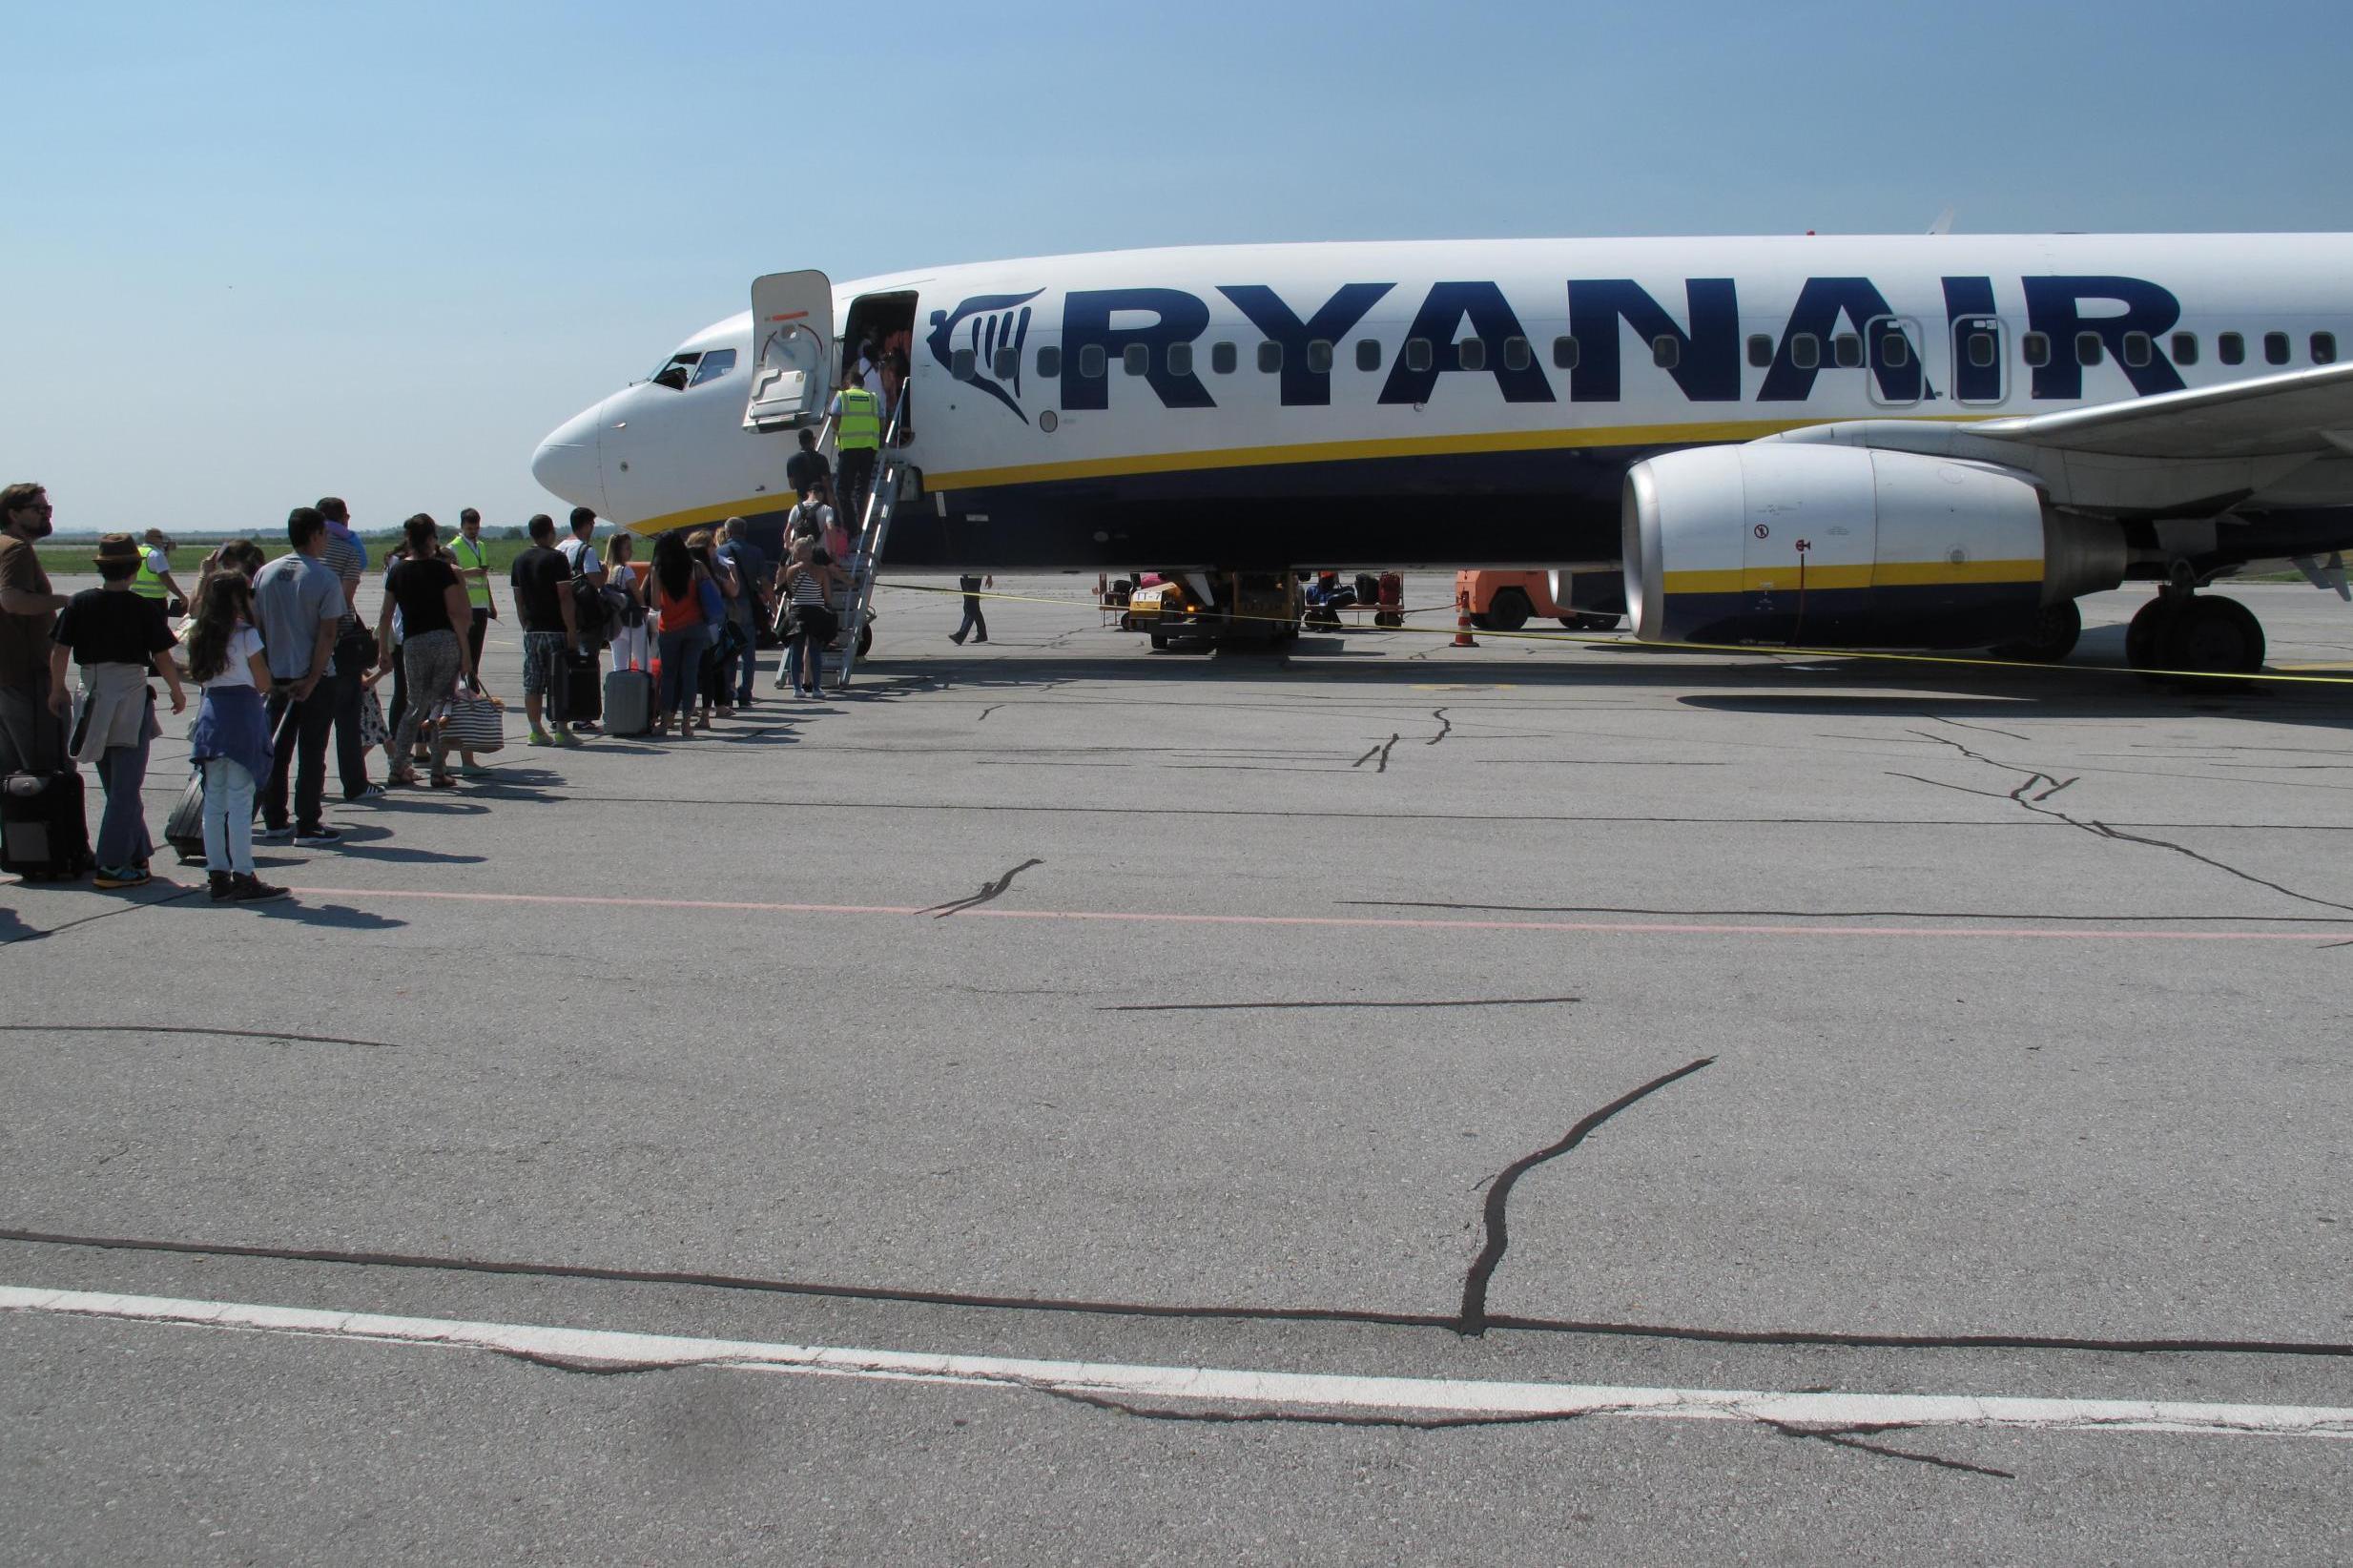 ‘Is this a tactic by Ryanair to charge more per seat?’ one passenger asked The Independent